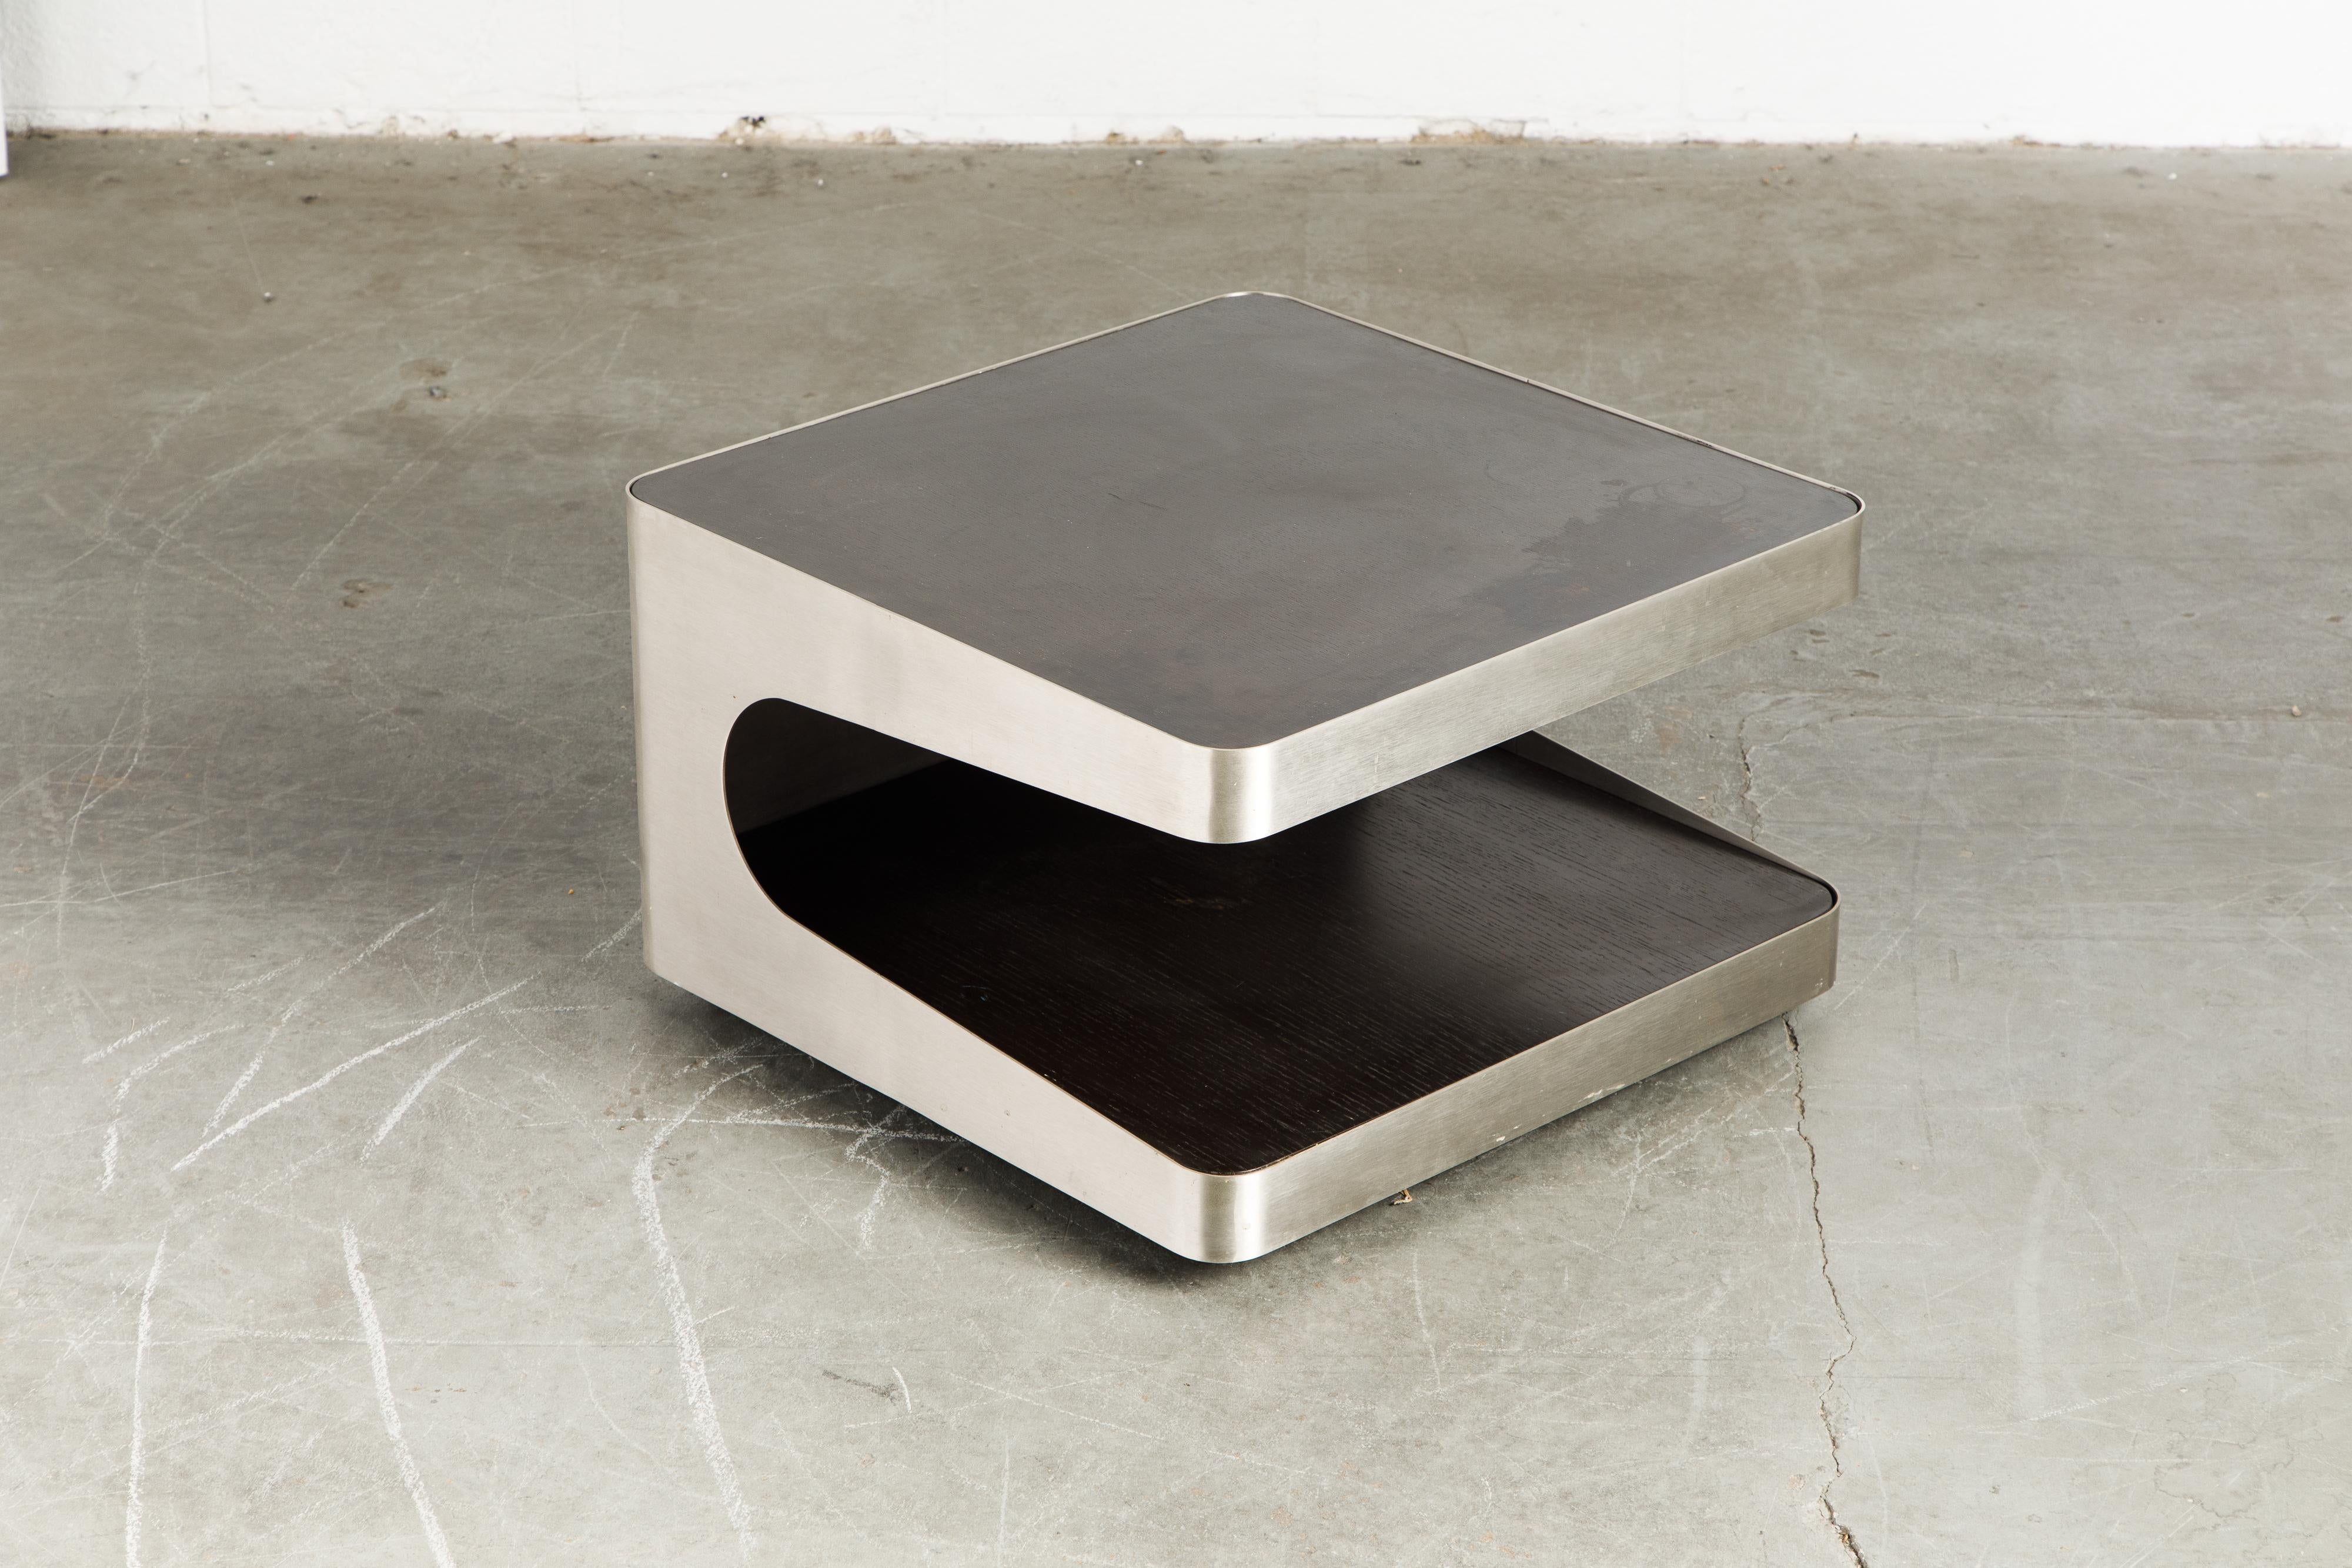 A beautiful French Modern cut steel two-tiered rolling coffee table or end table, circa 1970s. This modernist two-tier table features a brushed stainless steel frame cut into a cantilevered C-shape with two dark brown stained oak wood upper and